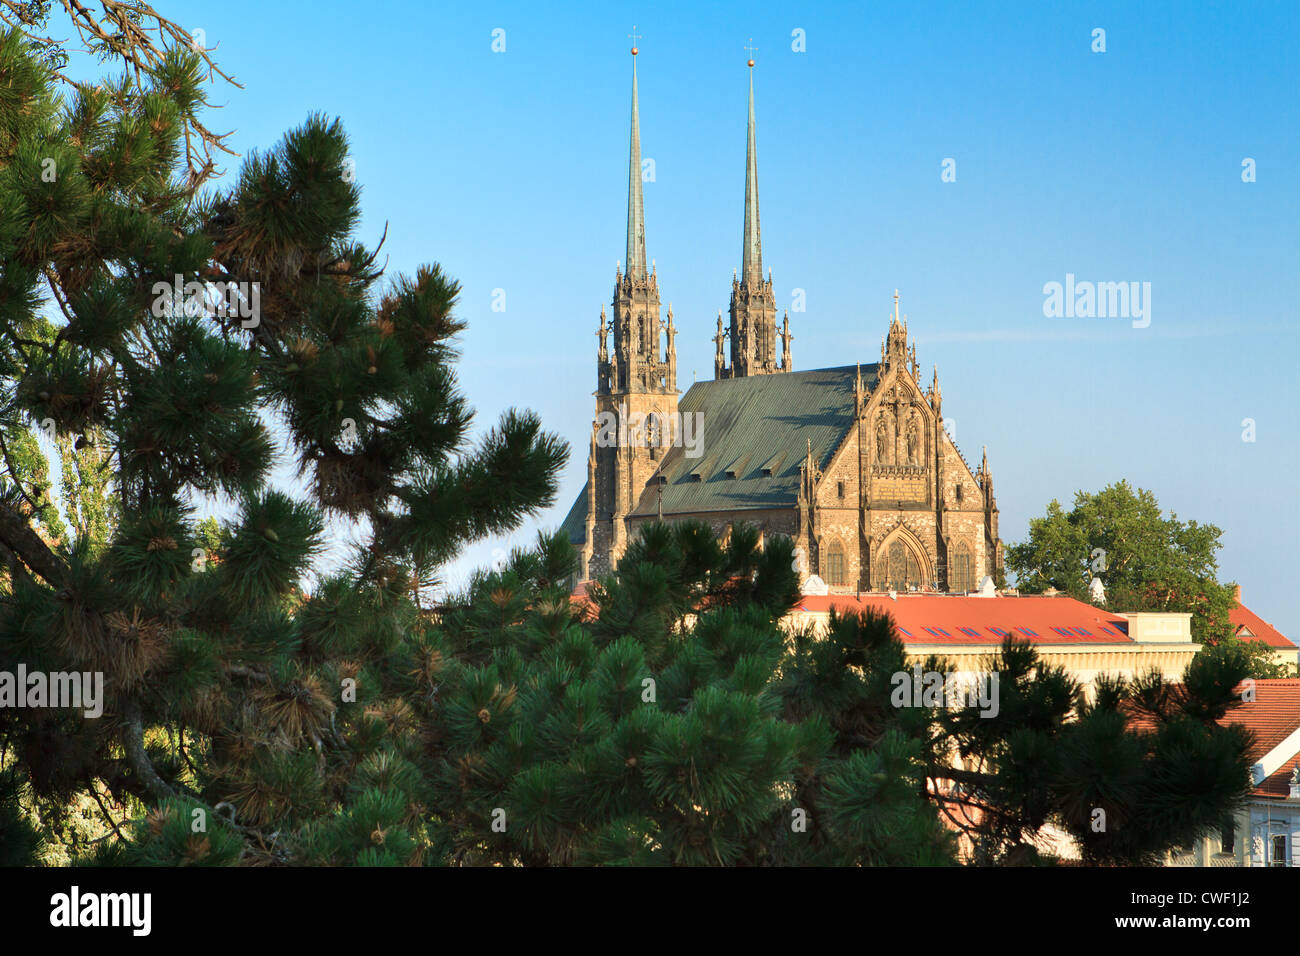 Cathedral St. Peter and Paul, Brno, Czech Republic. Stock Photo